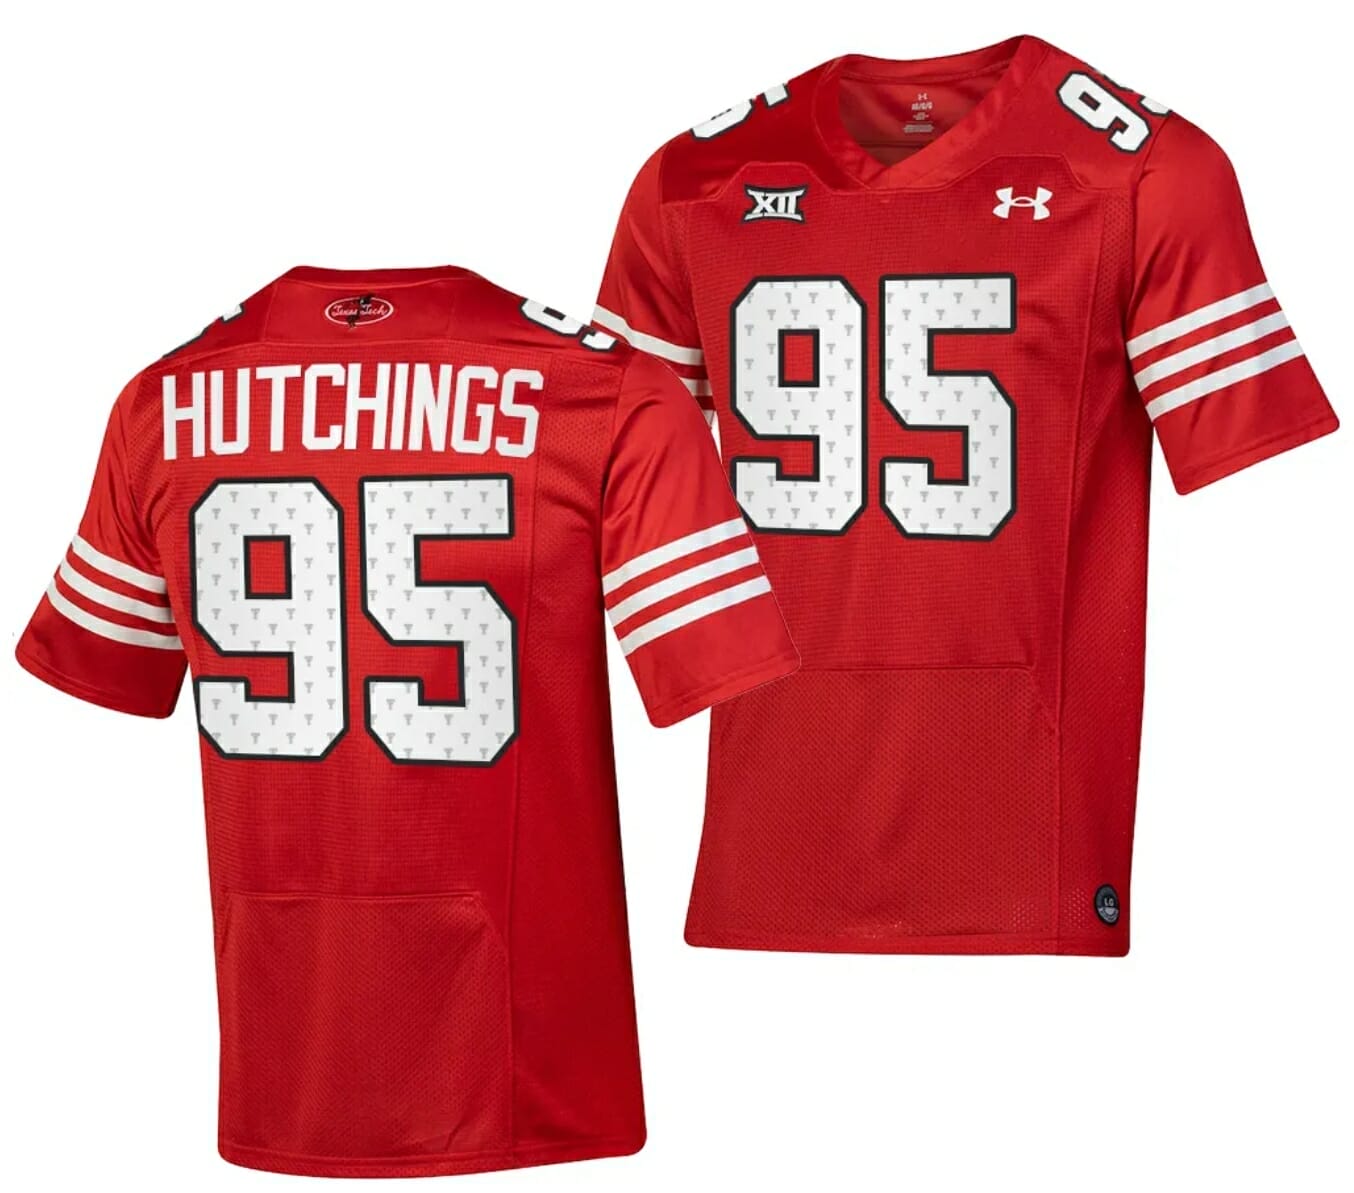 Hot] Buy New Jaylon Hutchings Jersey #95 Texas Tech Throwback Red